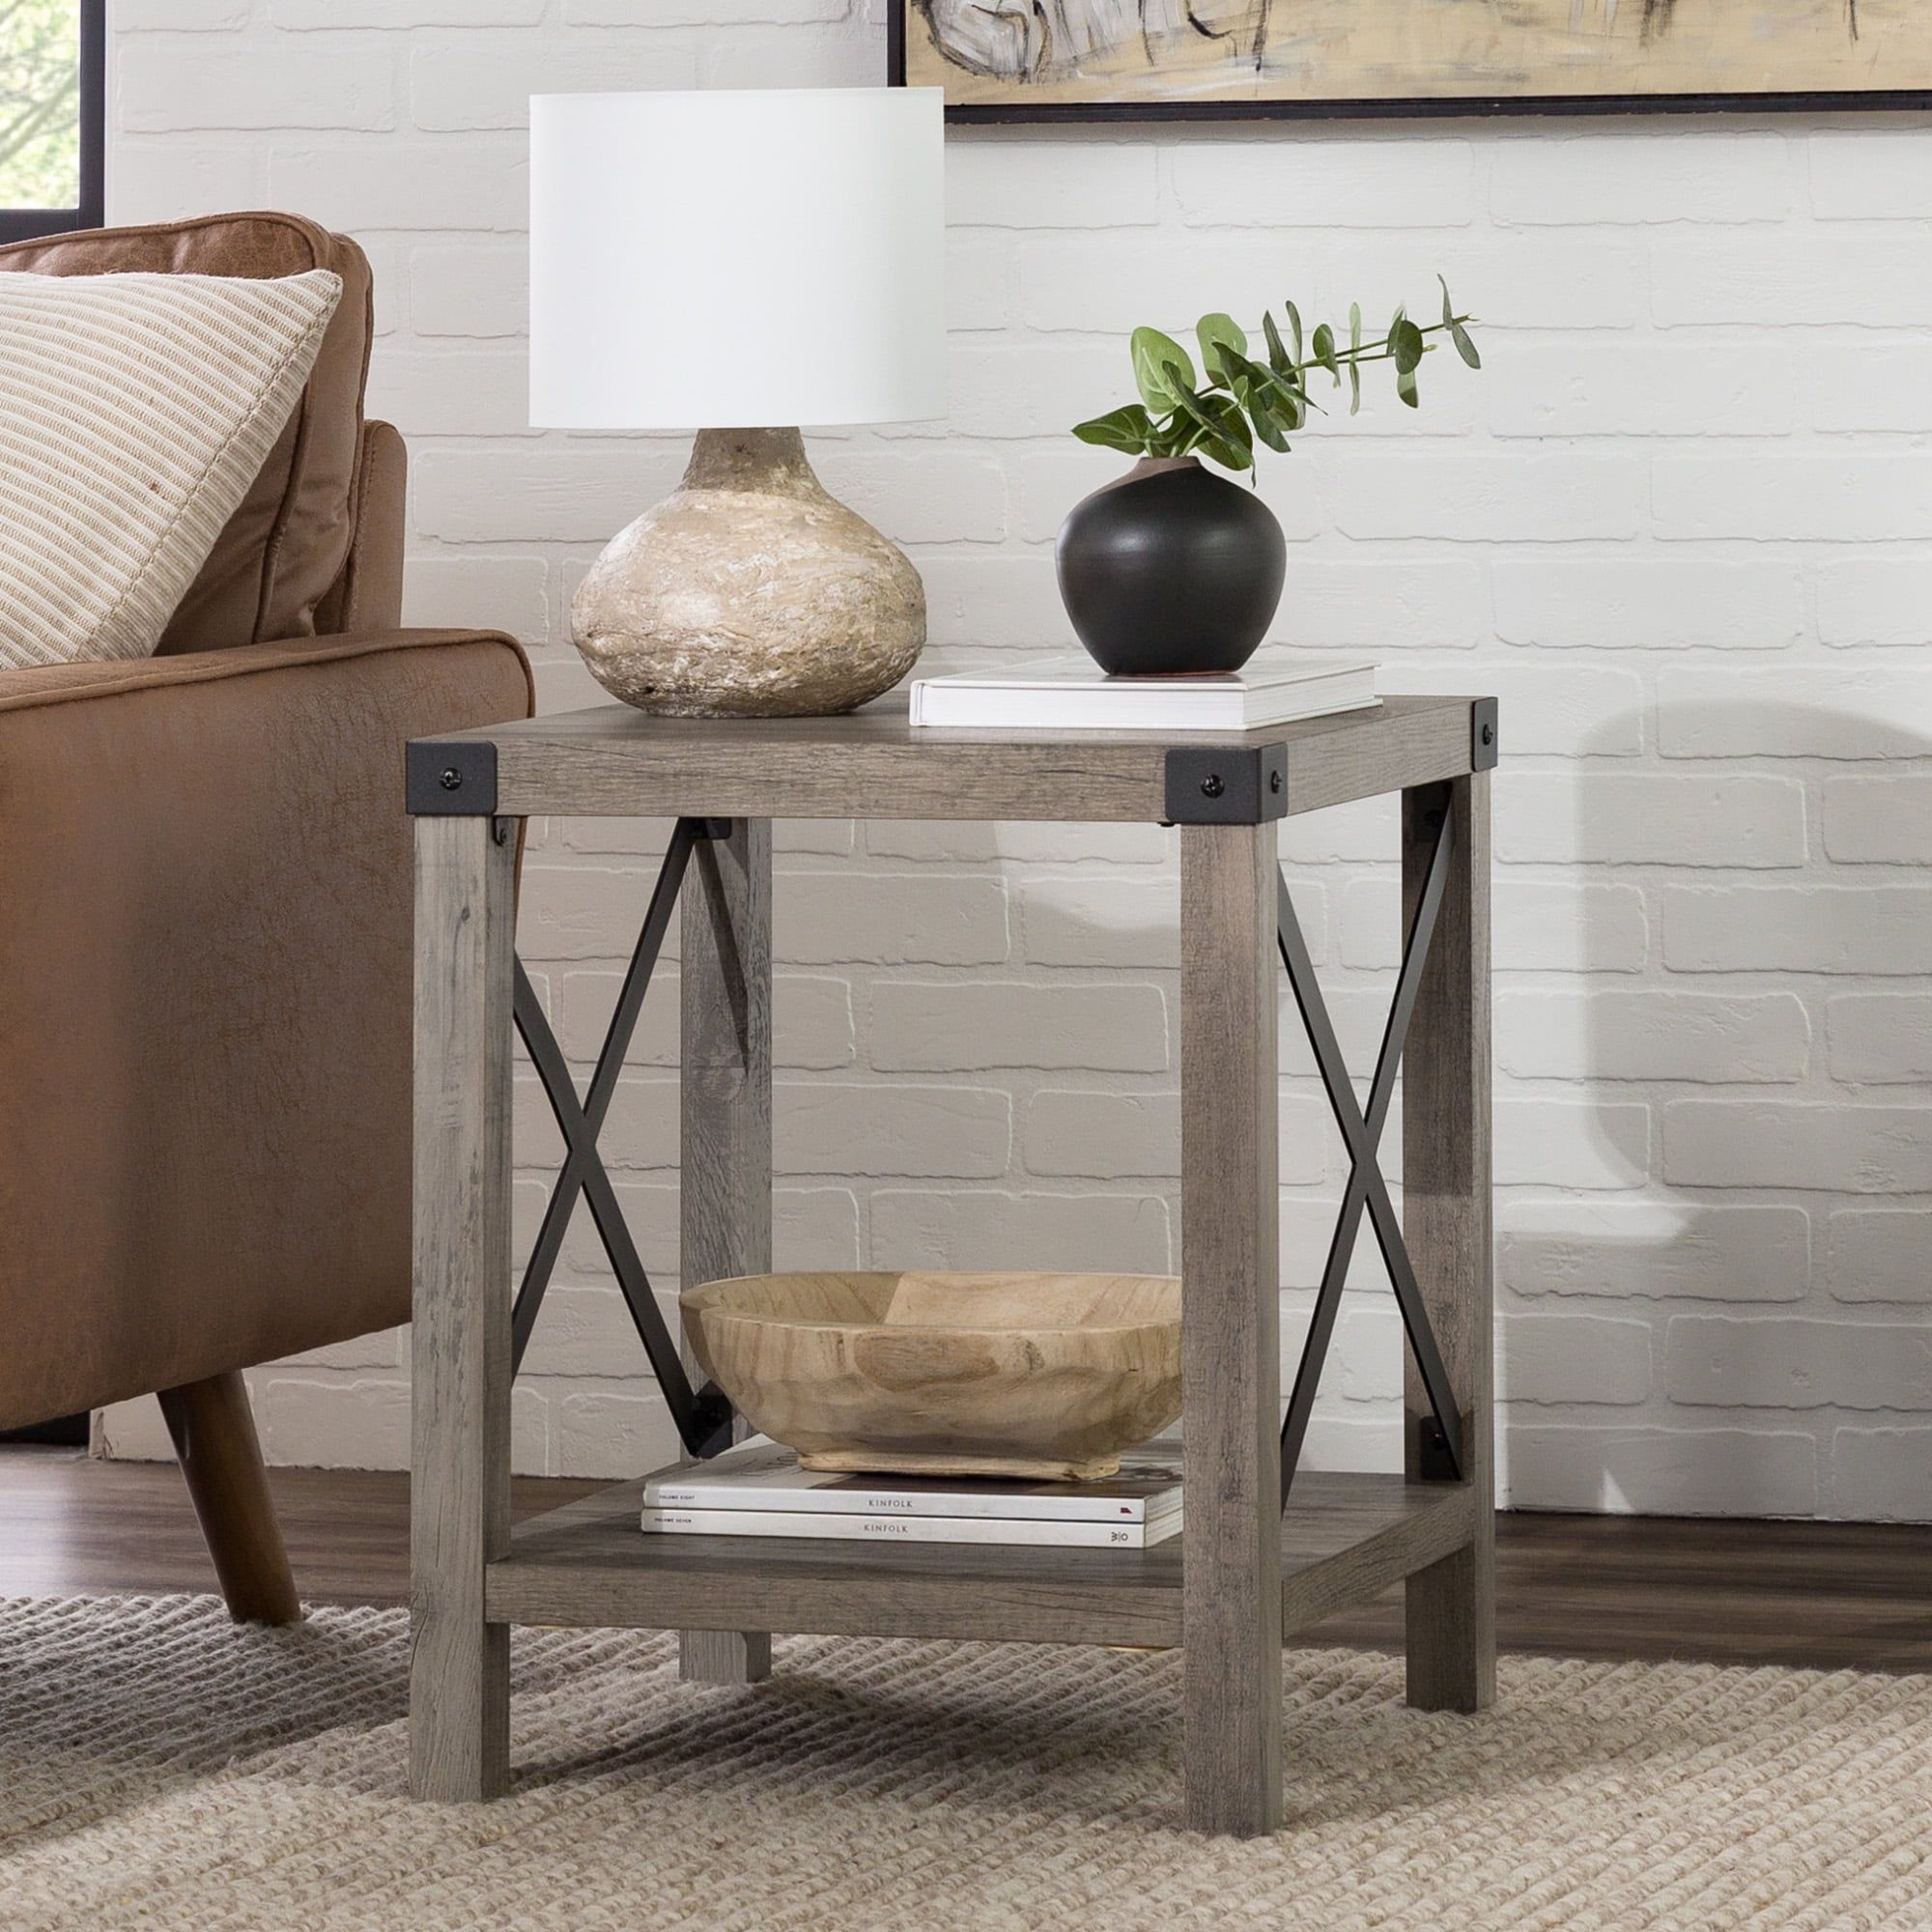 Woven Paths Magnolia Metal X End Table, Grey Wash – Walmart With Regard To Rustic Gray End Tables (View 4 of 15)